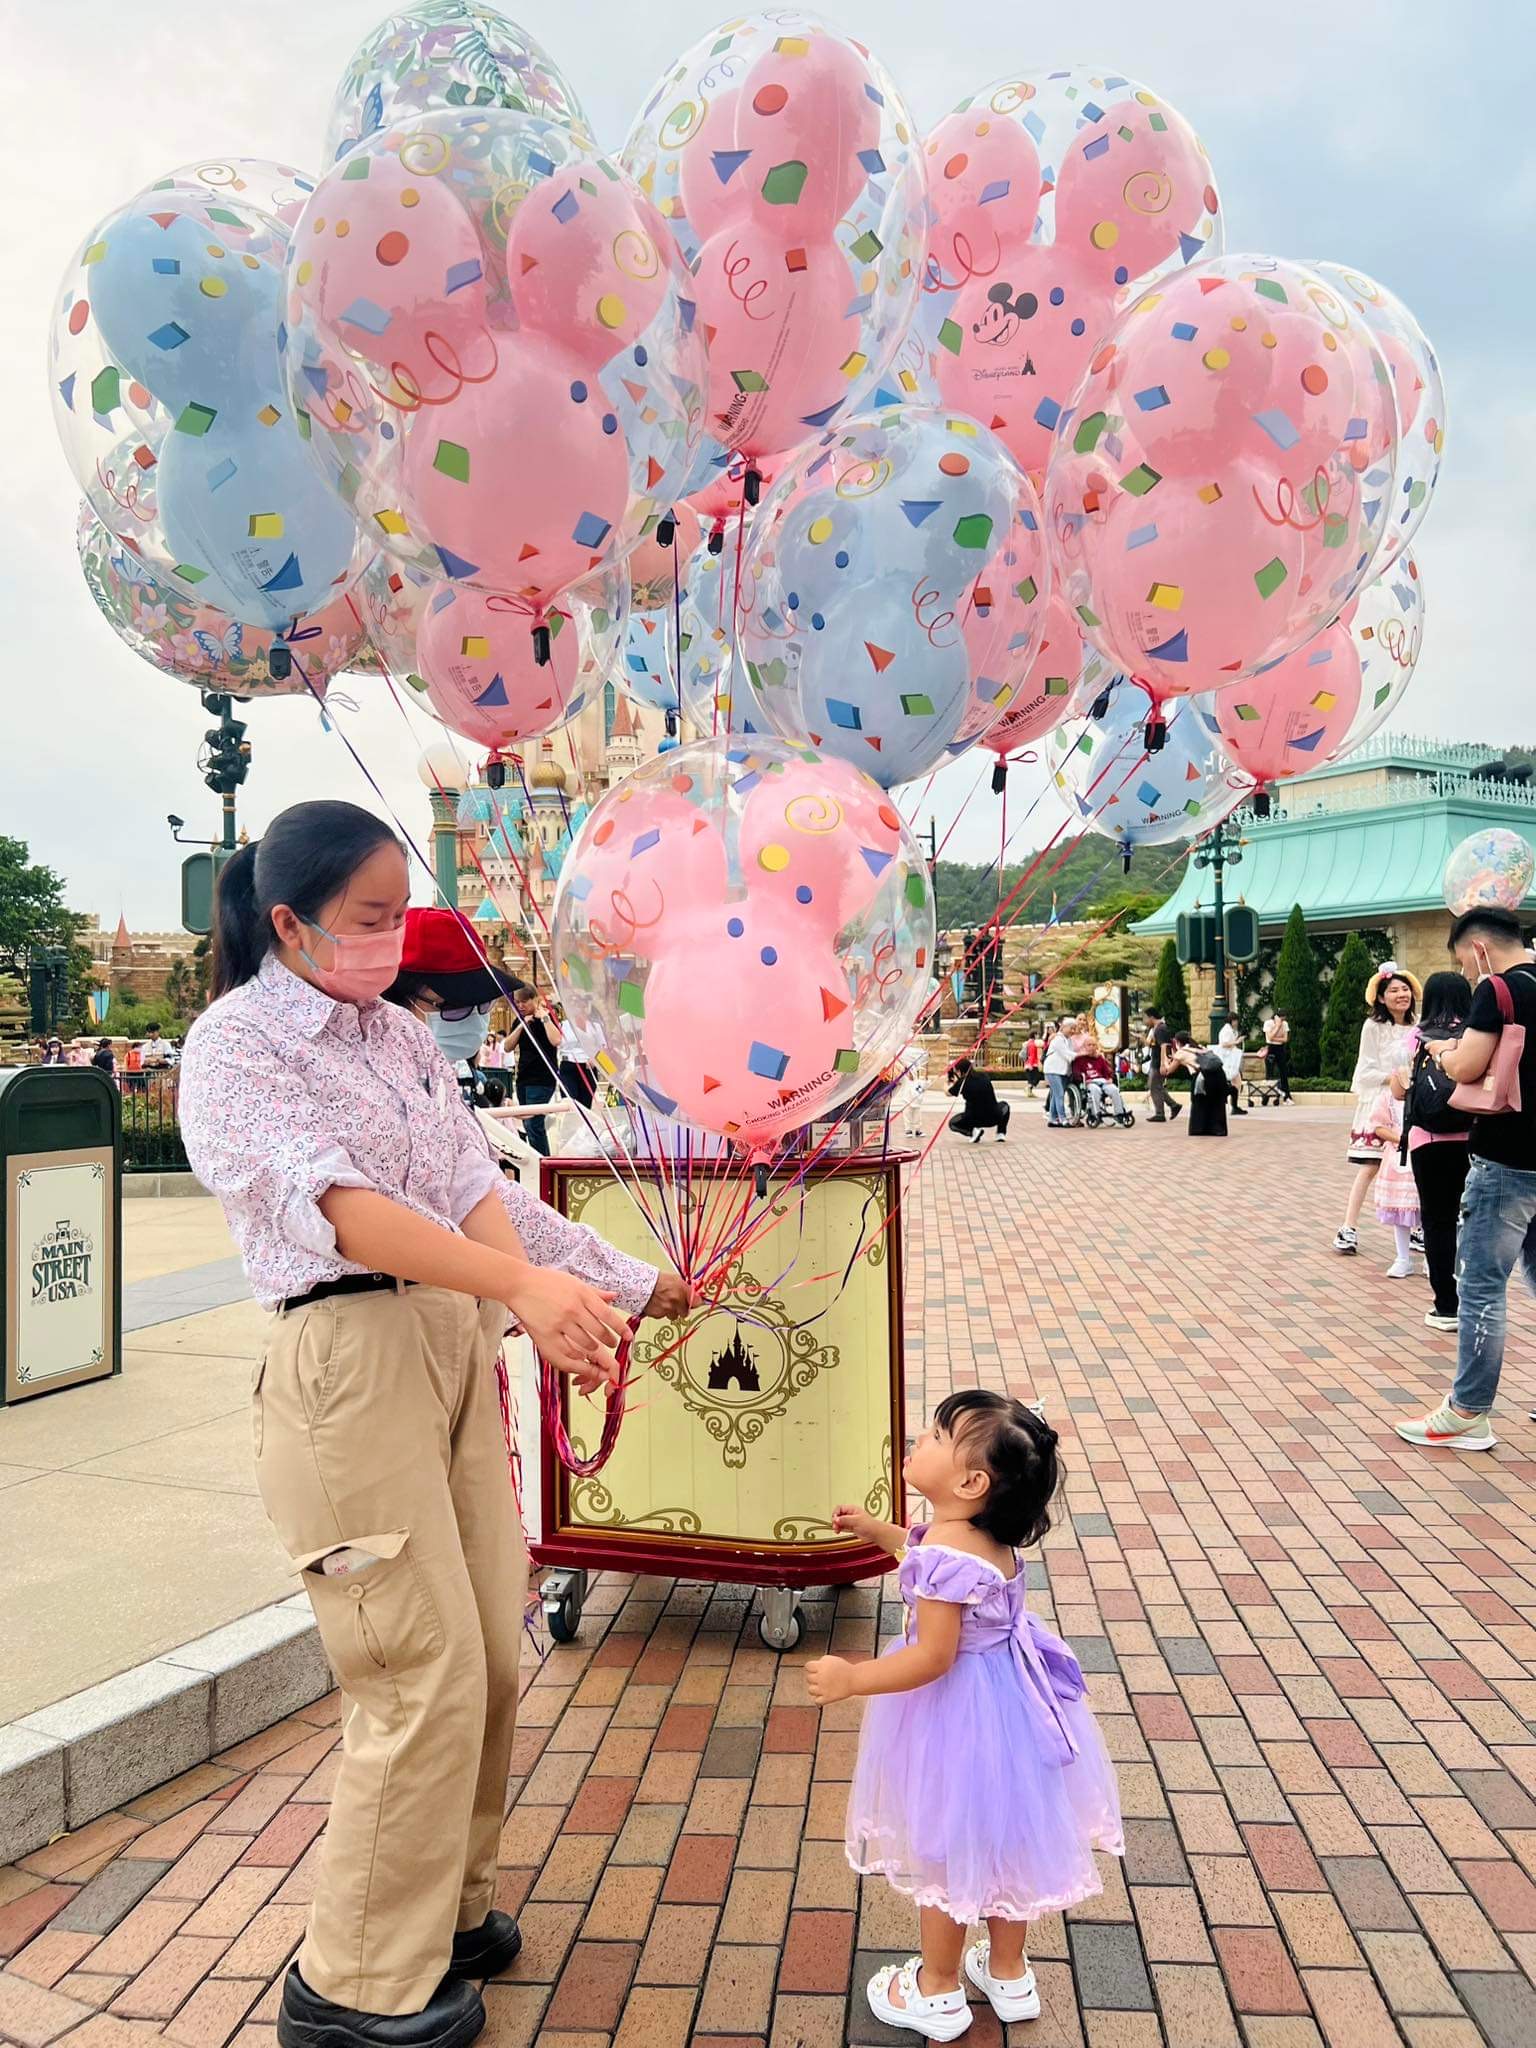 Leovy's small daughter, dressed in a purple princess gown, gets a balloon from a cast member at Hong Kong Disneyland Resort